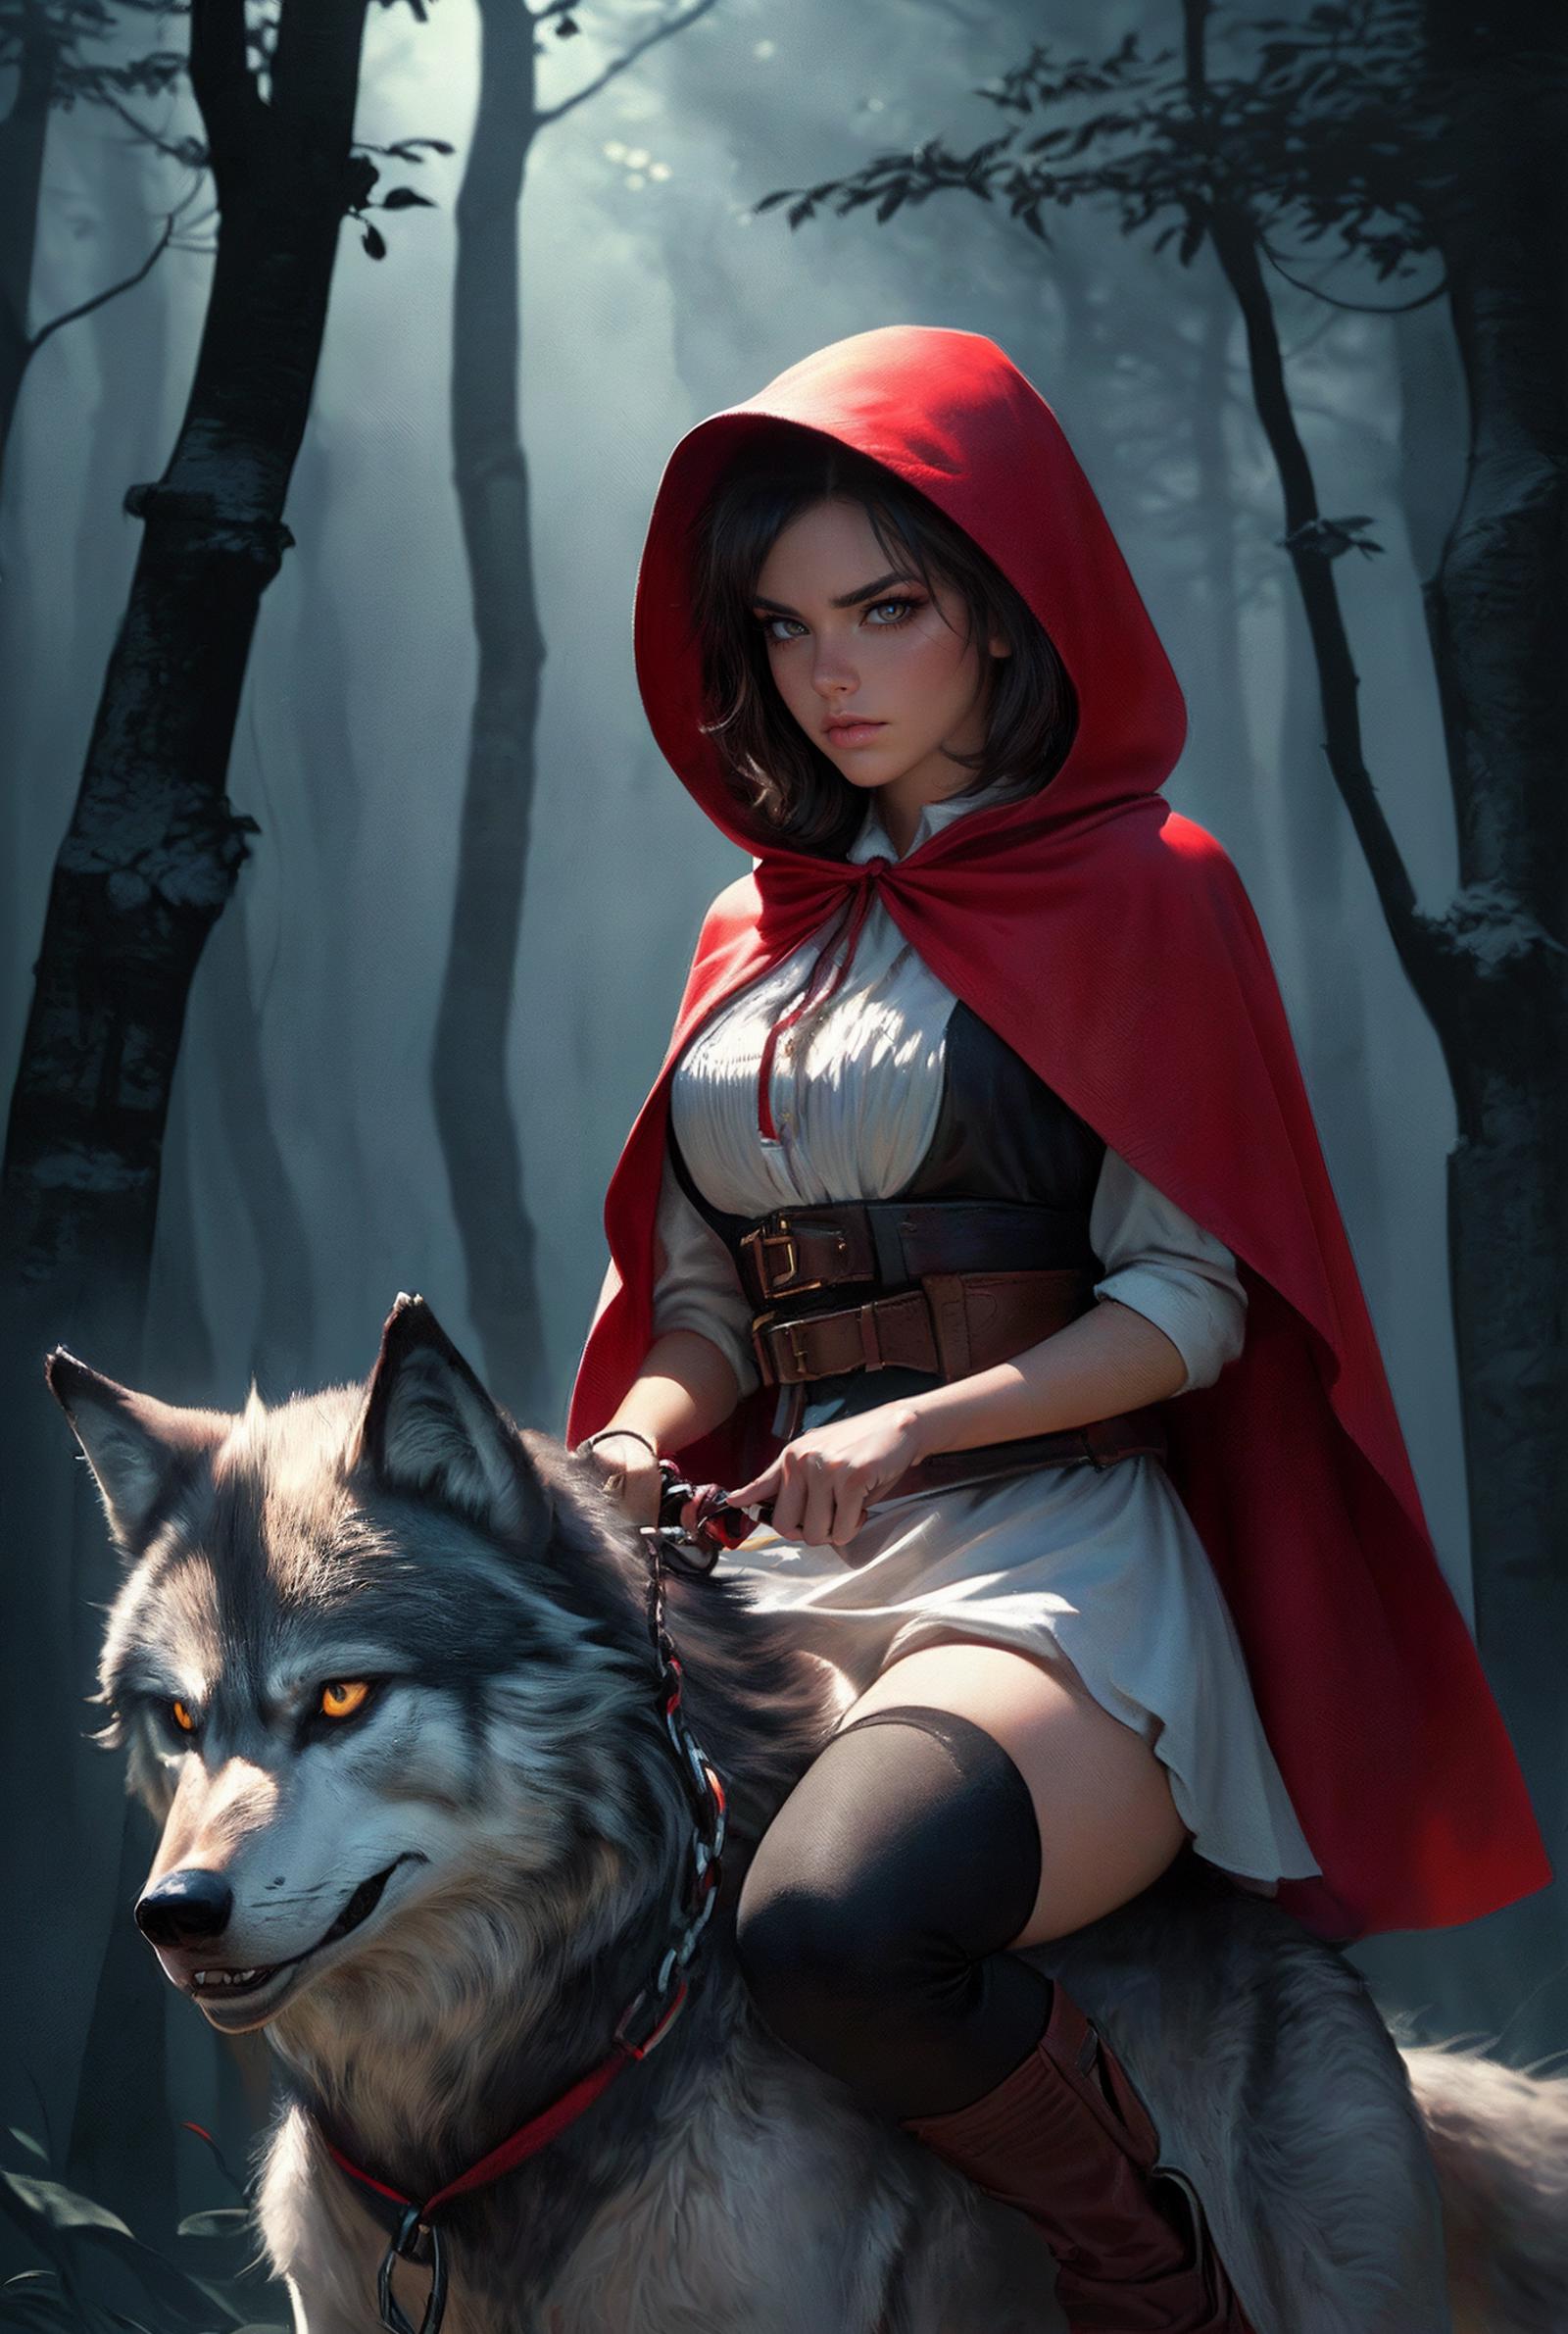 The Little Red Riding Hood character riding a wolf.